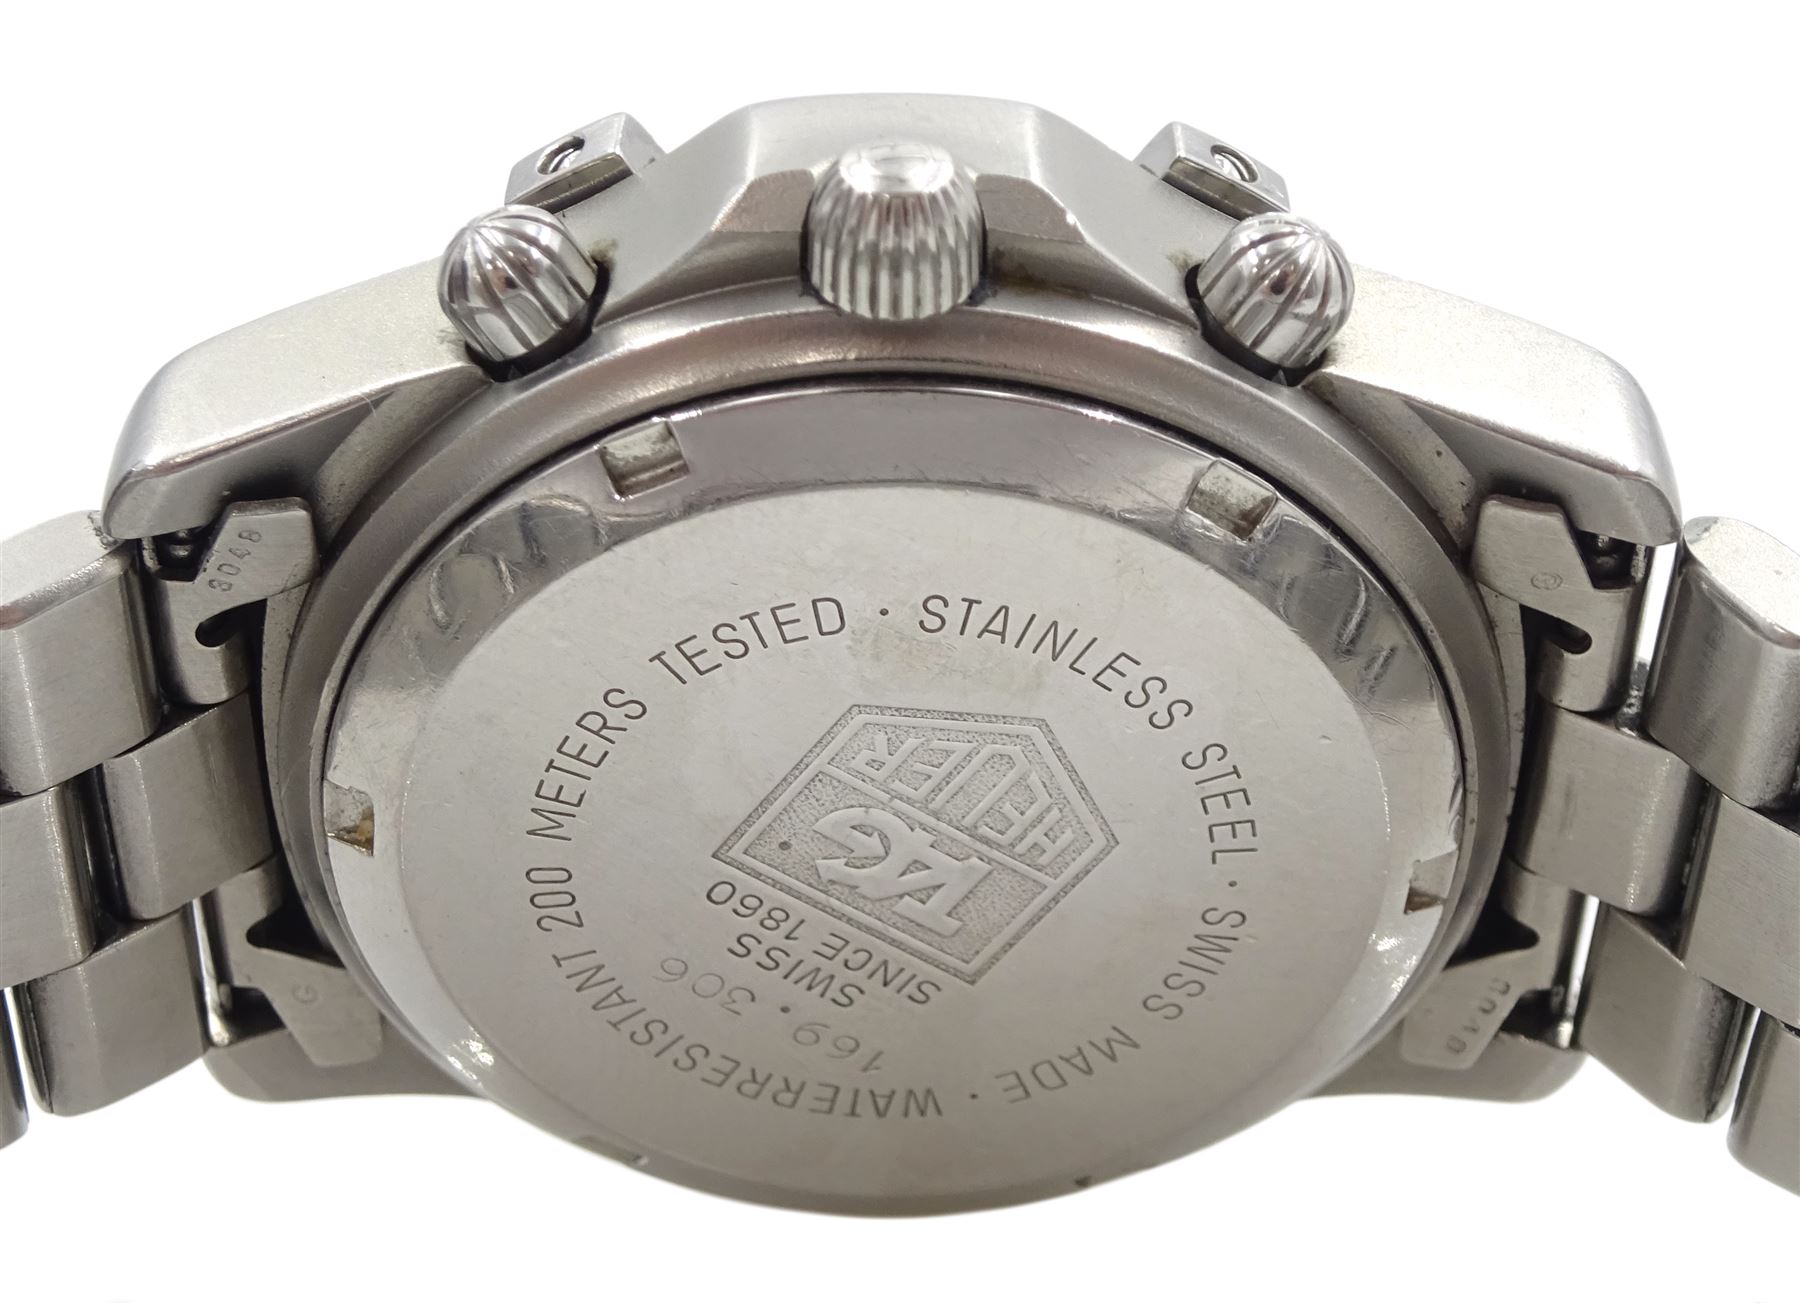 Tag Heuer 2000 gentleman's stainless steel automatic chronograph wristwatch - Image 4 of 4